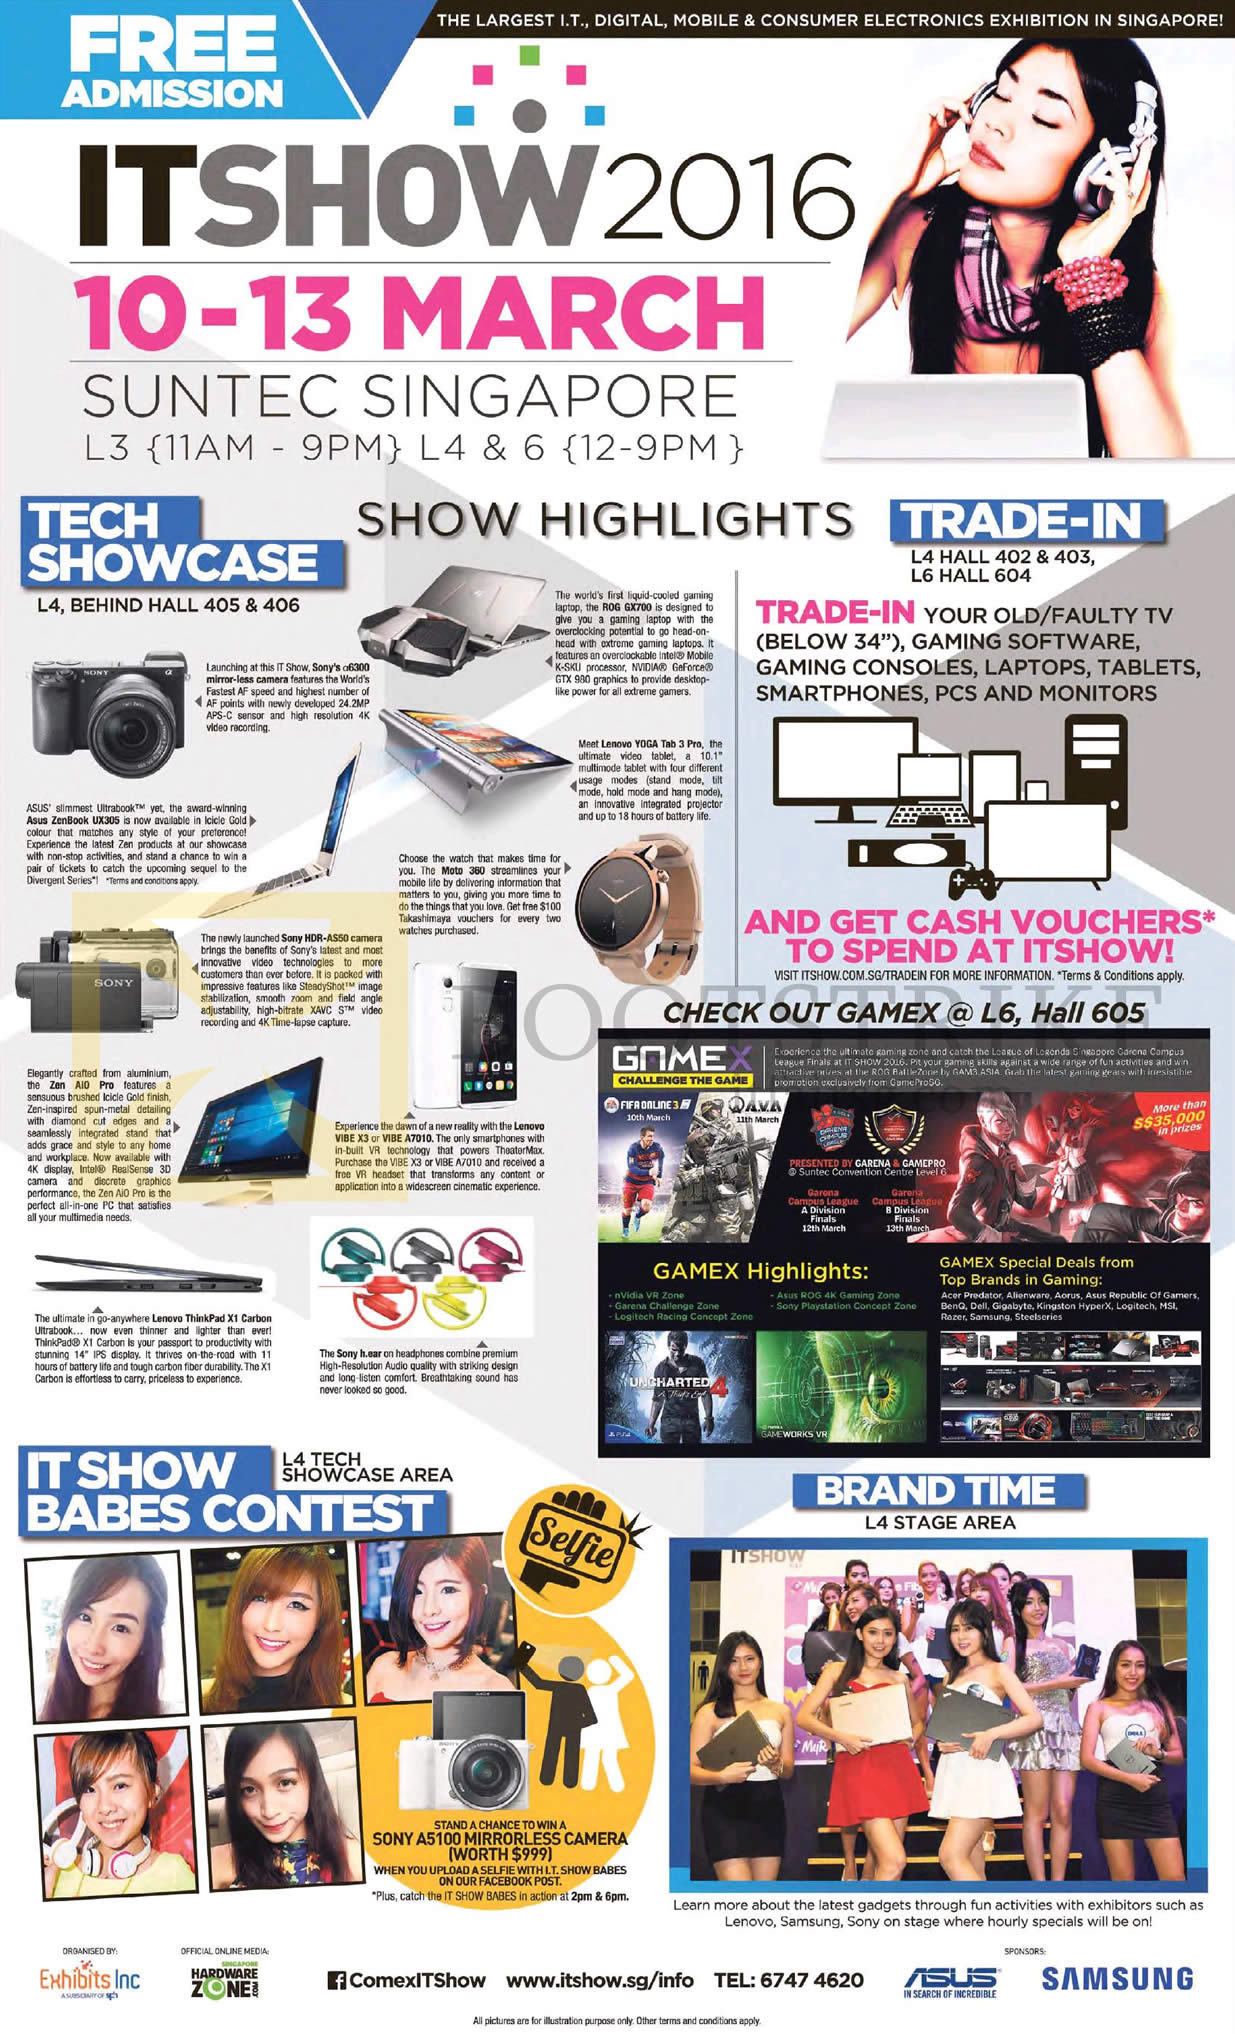 IT SHOW 2016 price list image brochure of IT SHOW 2016 Event Details, Venue, Opening Hours, Highlights, Trade-In, Tech Showcase, Gamex, Babes Contest, Brand Time